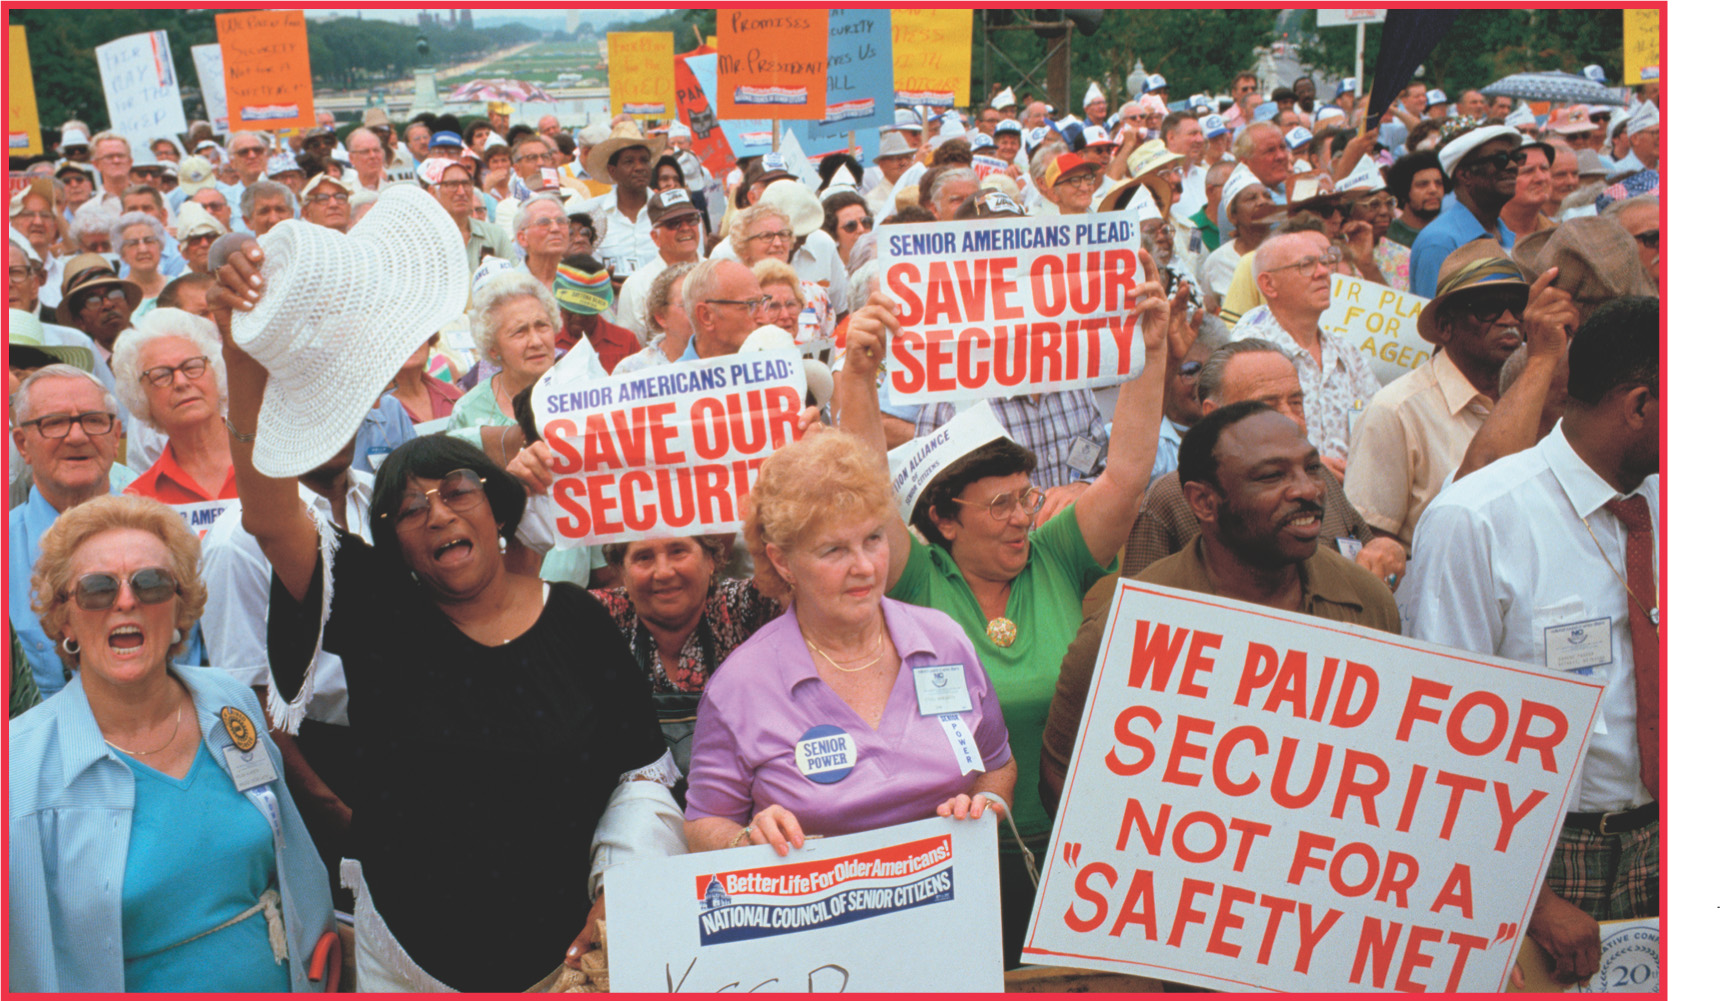 photo: elderly protesters carry signs that read 'Save Our Security' and 'We paid for security not for a Safety Net.'